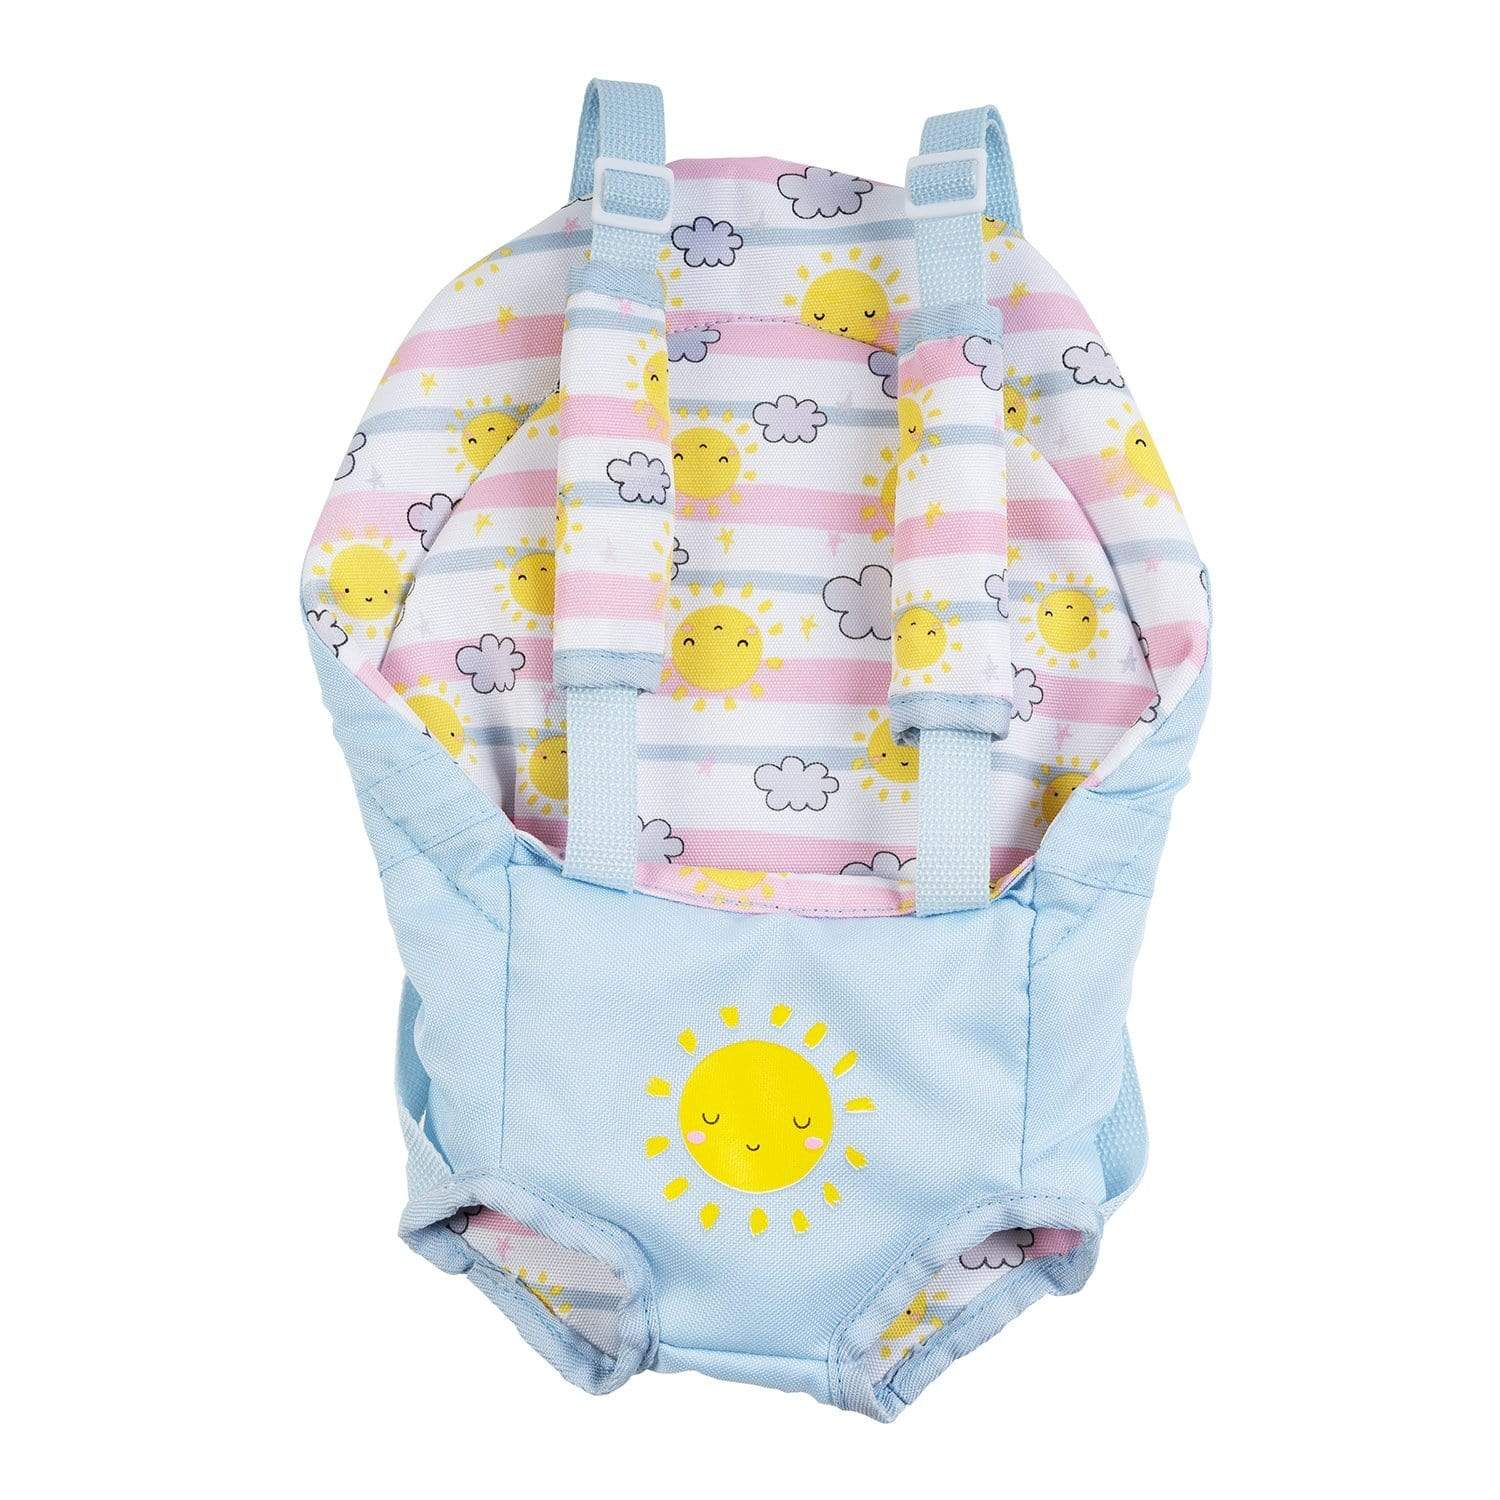 Adora Snuggle Baby Doll Carrier - Color-Changing Sunny Days